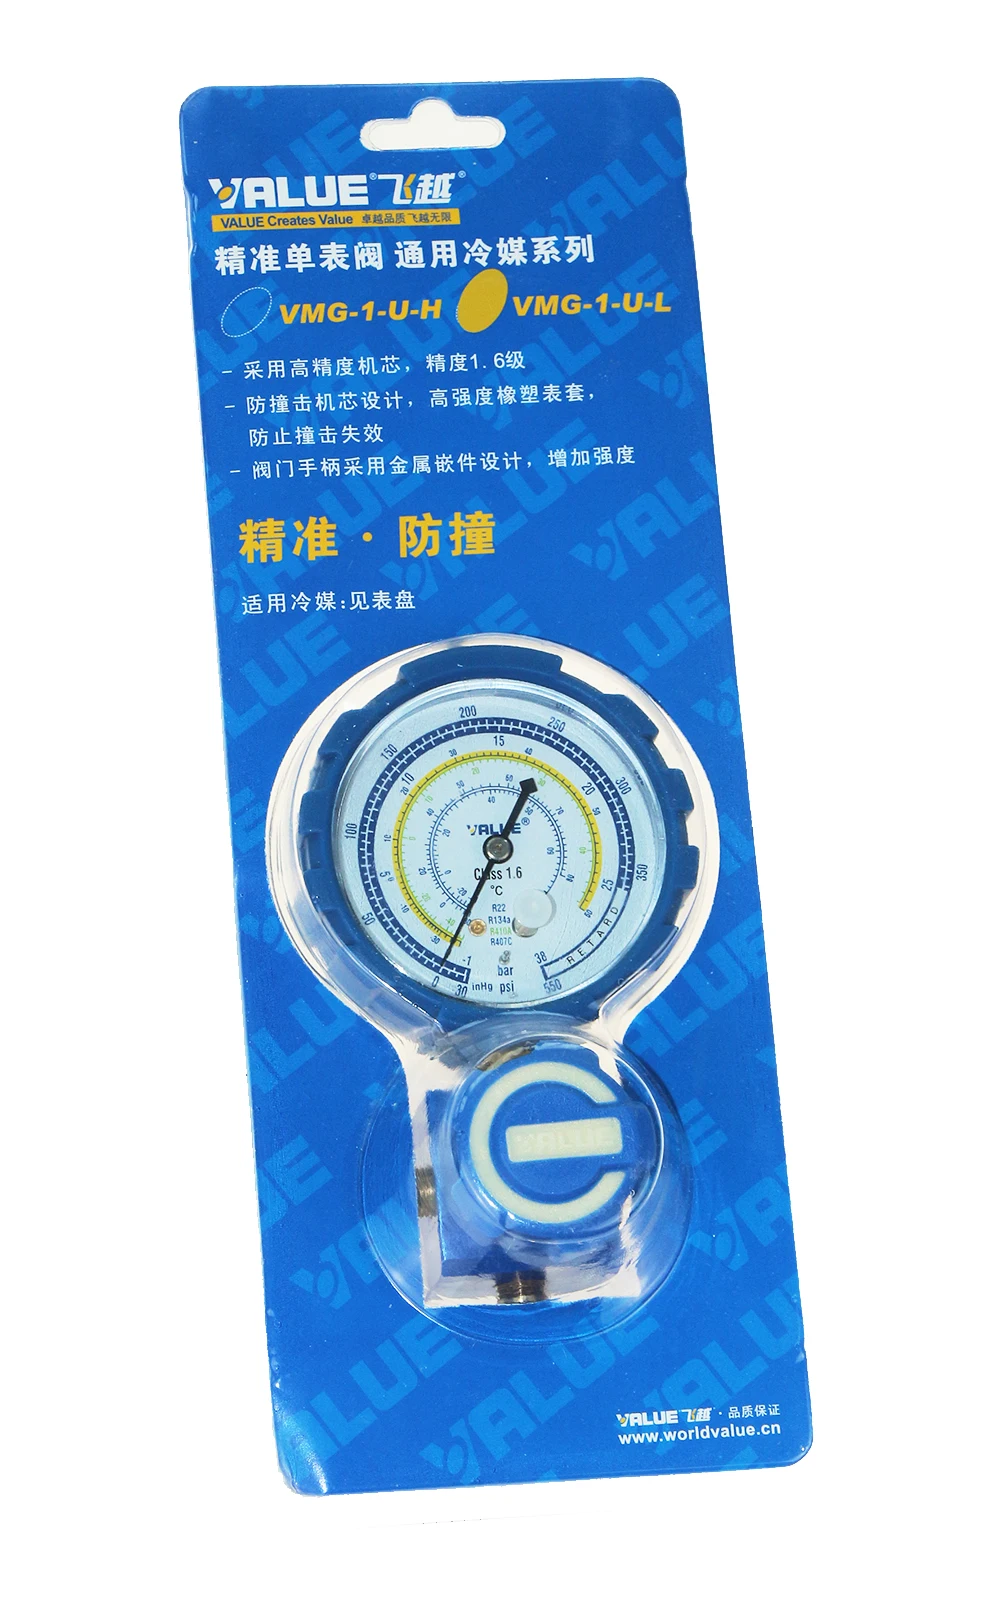 VALUE Collision Proof Single Gauge VMG-1-U-L low pressure For Kinds of Refrigeration like R22 R41O R134A Free shipping